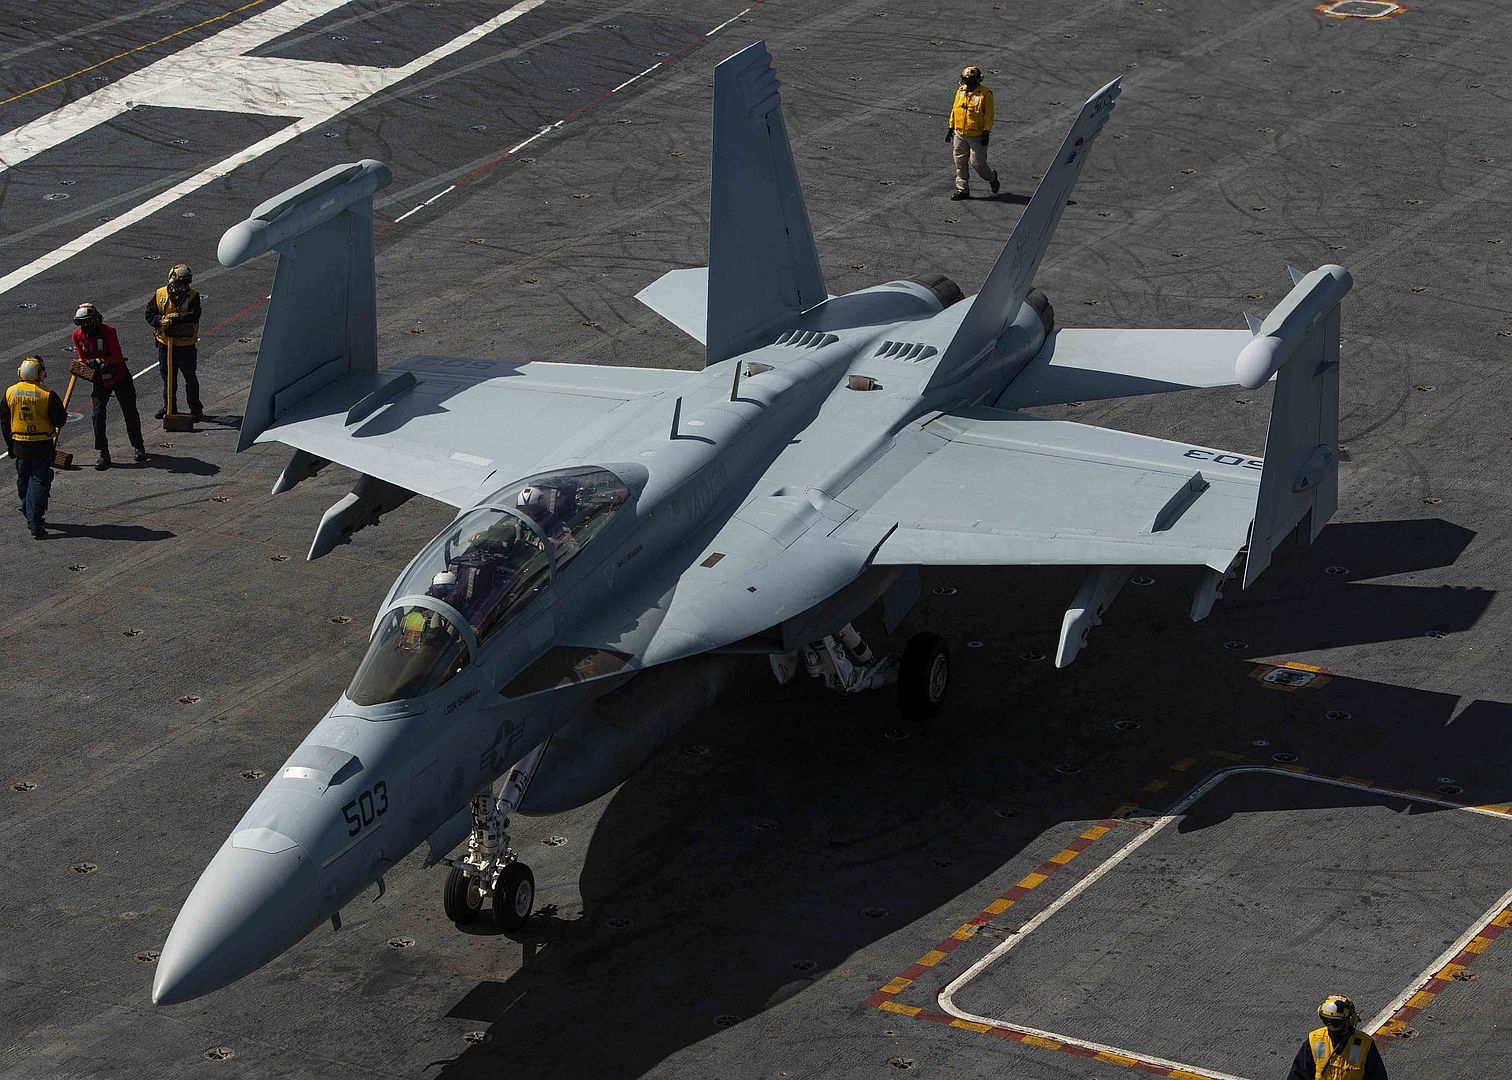 18G Growler From The Vikings Of Electronic Attack Squadron 129 Taxis Across The Flight Deck Of The Aircraft Carrier USS Nimitz